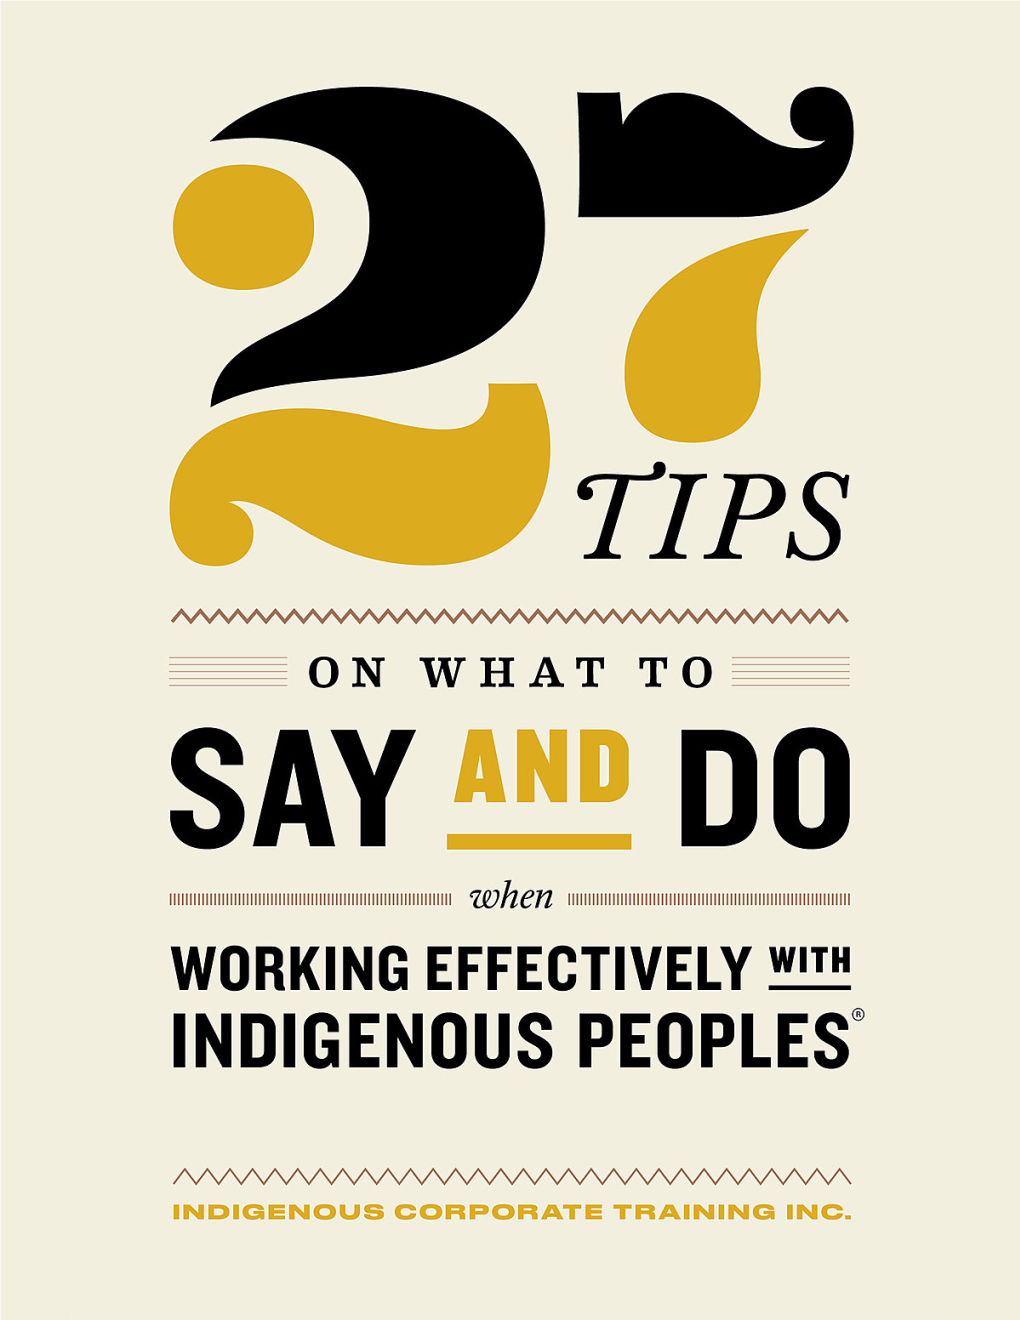 27 Tips on What to Say and Do When Working with Indigenous Peoples